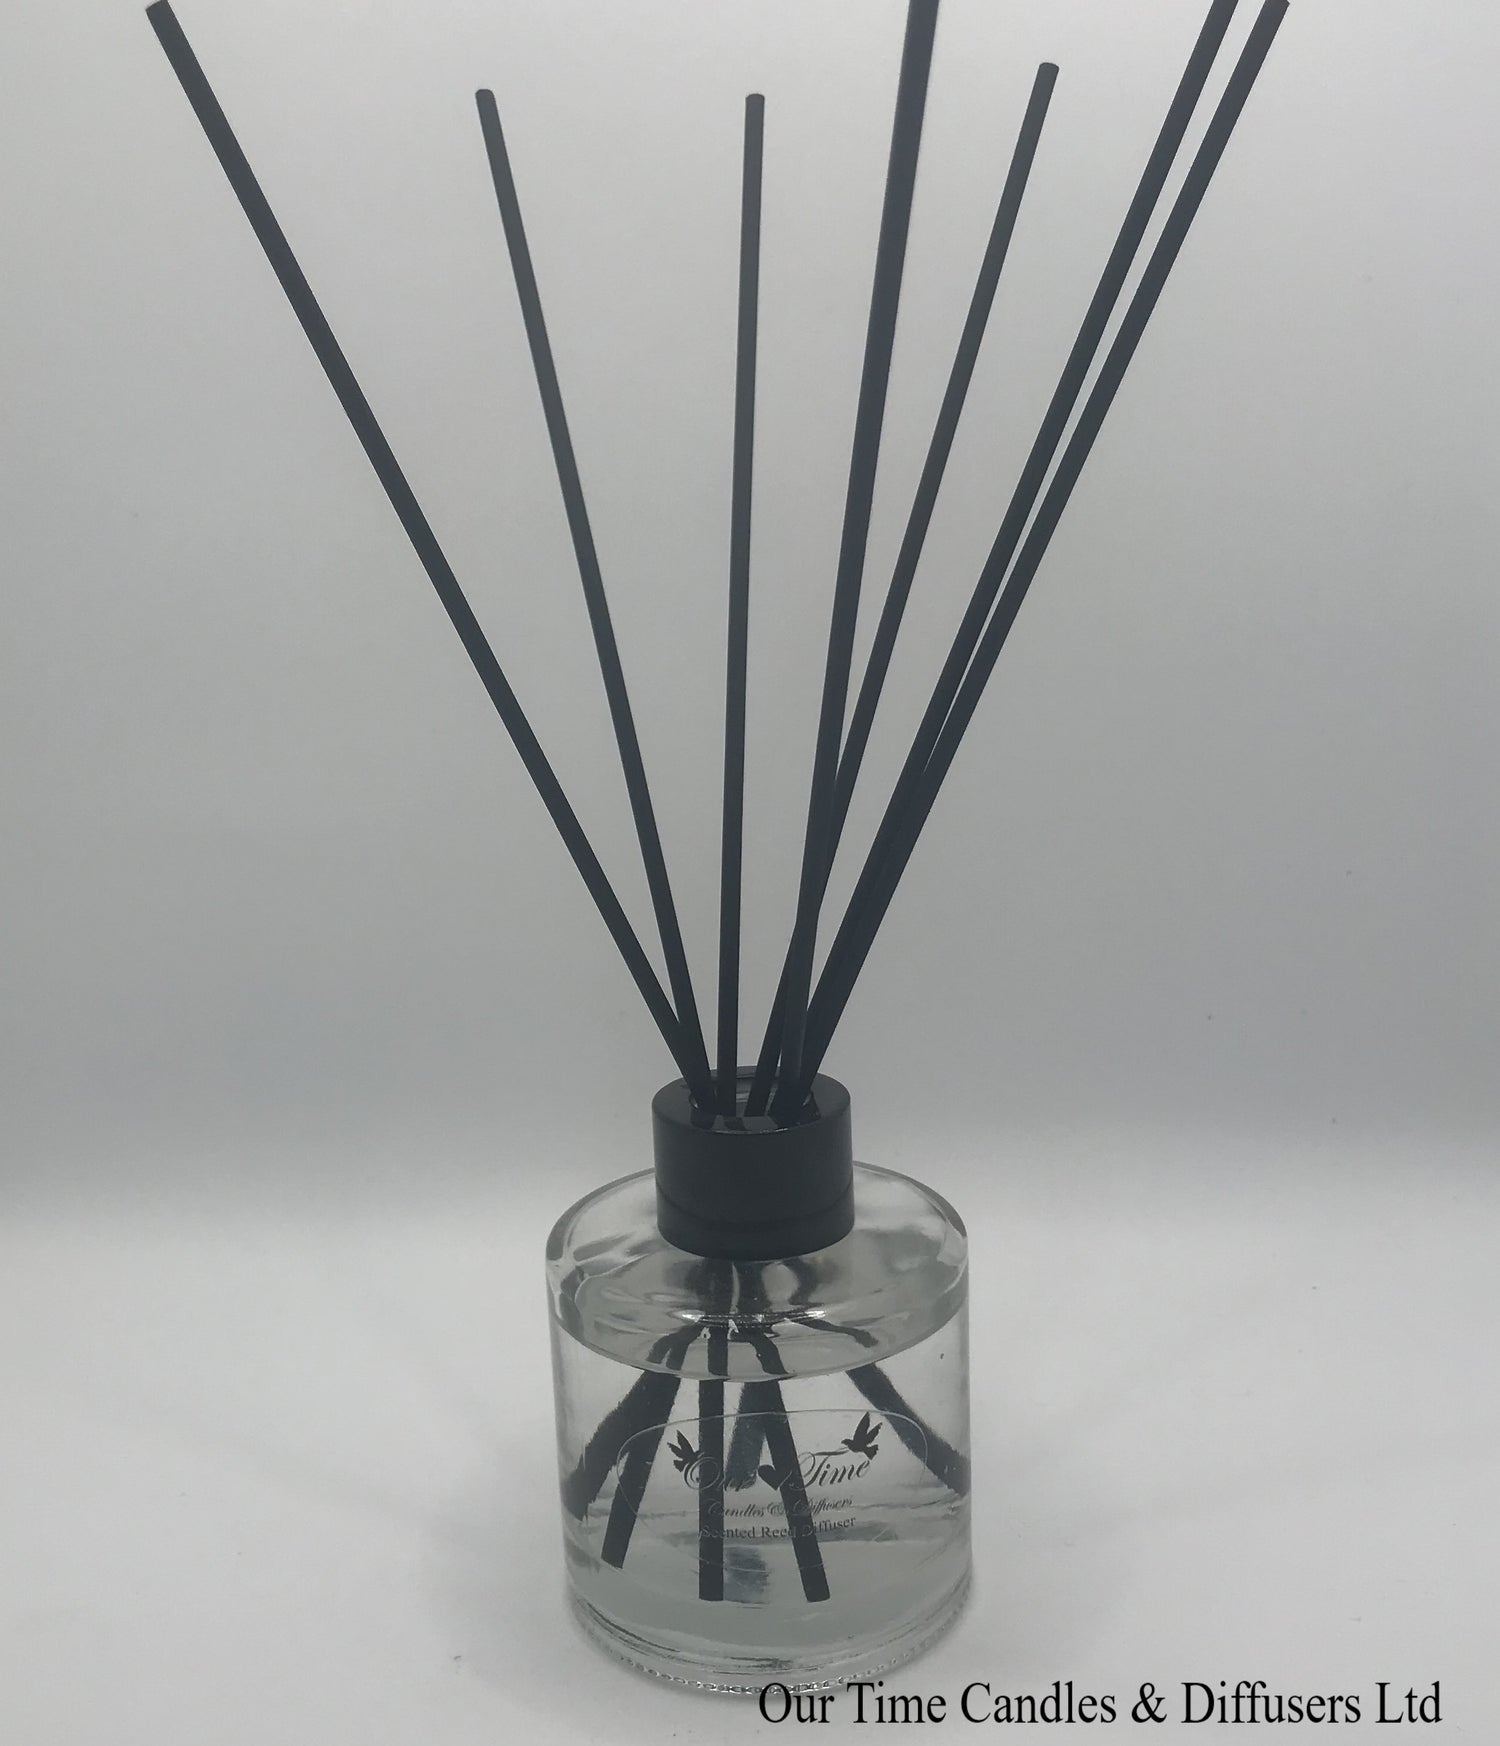 Reed Diffuser - Our Time Candles and Diffusers